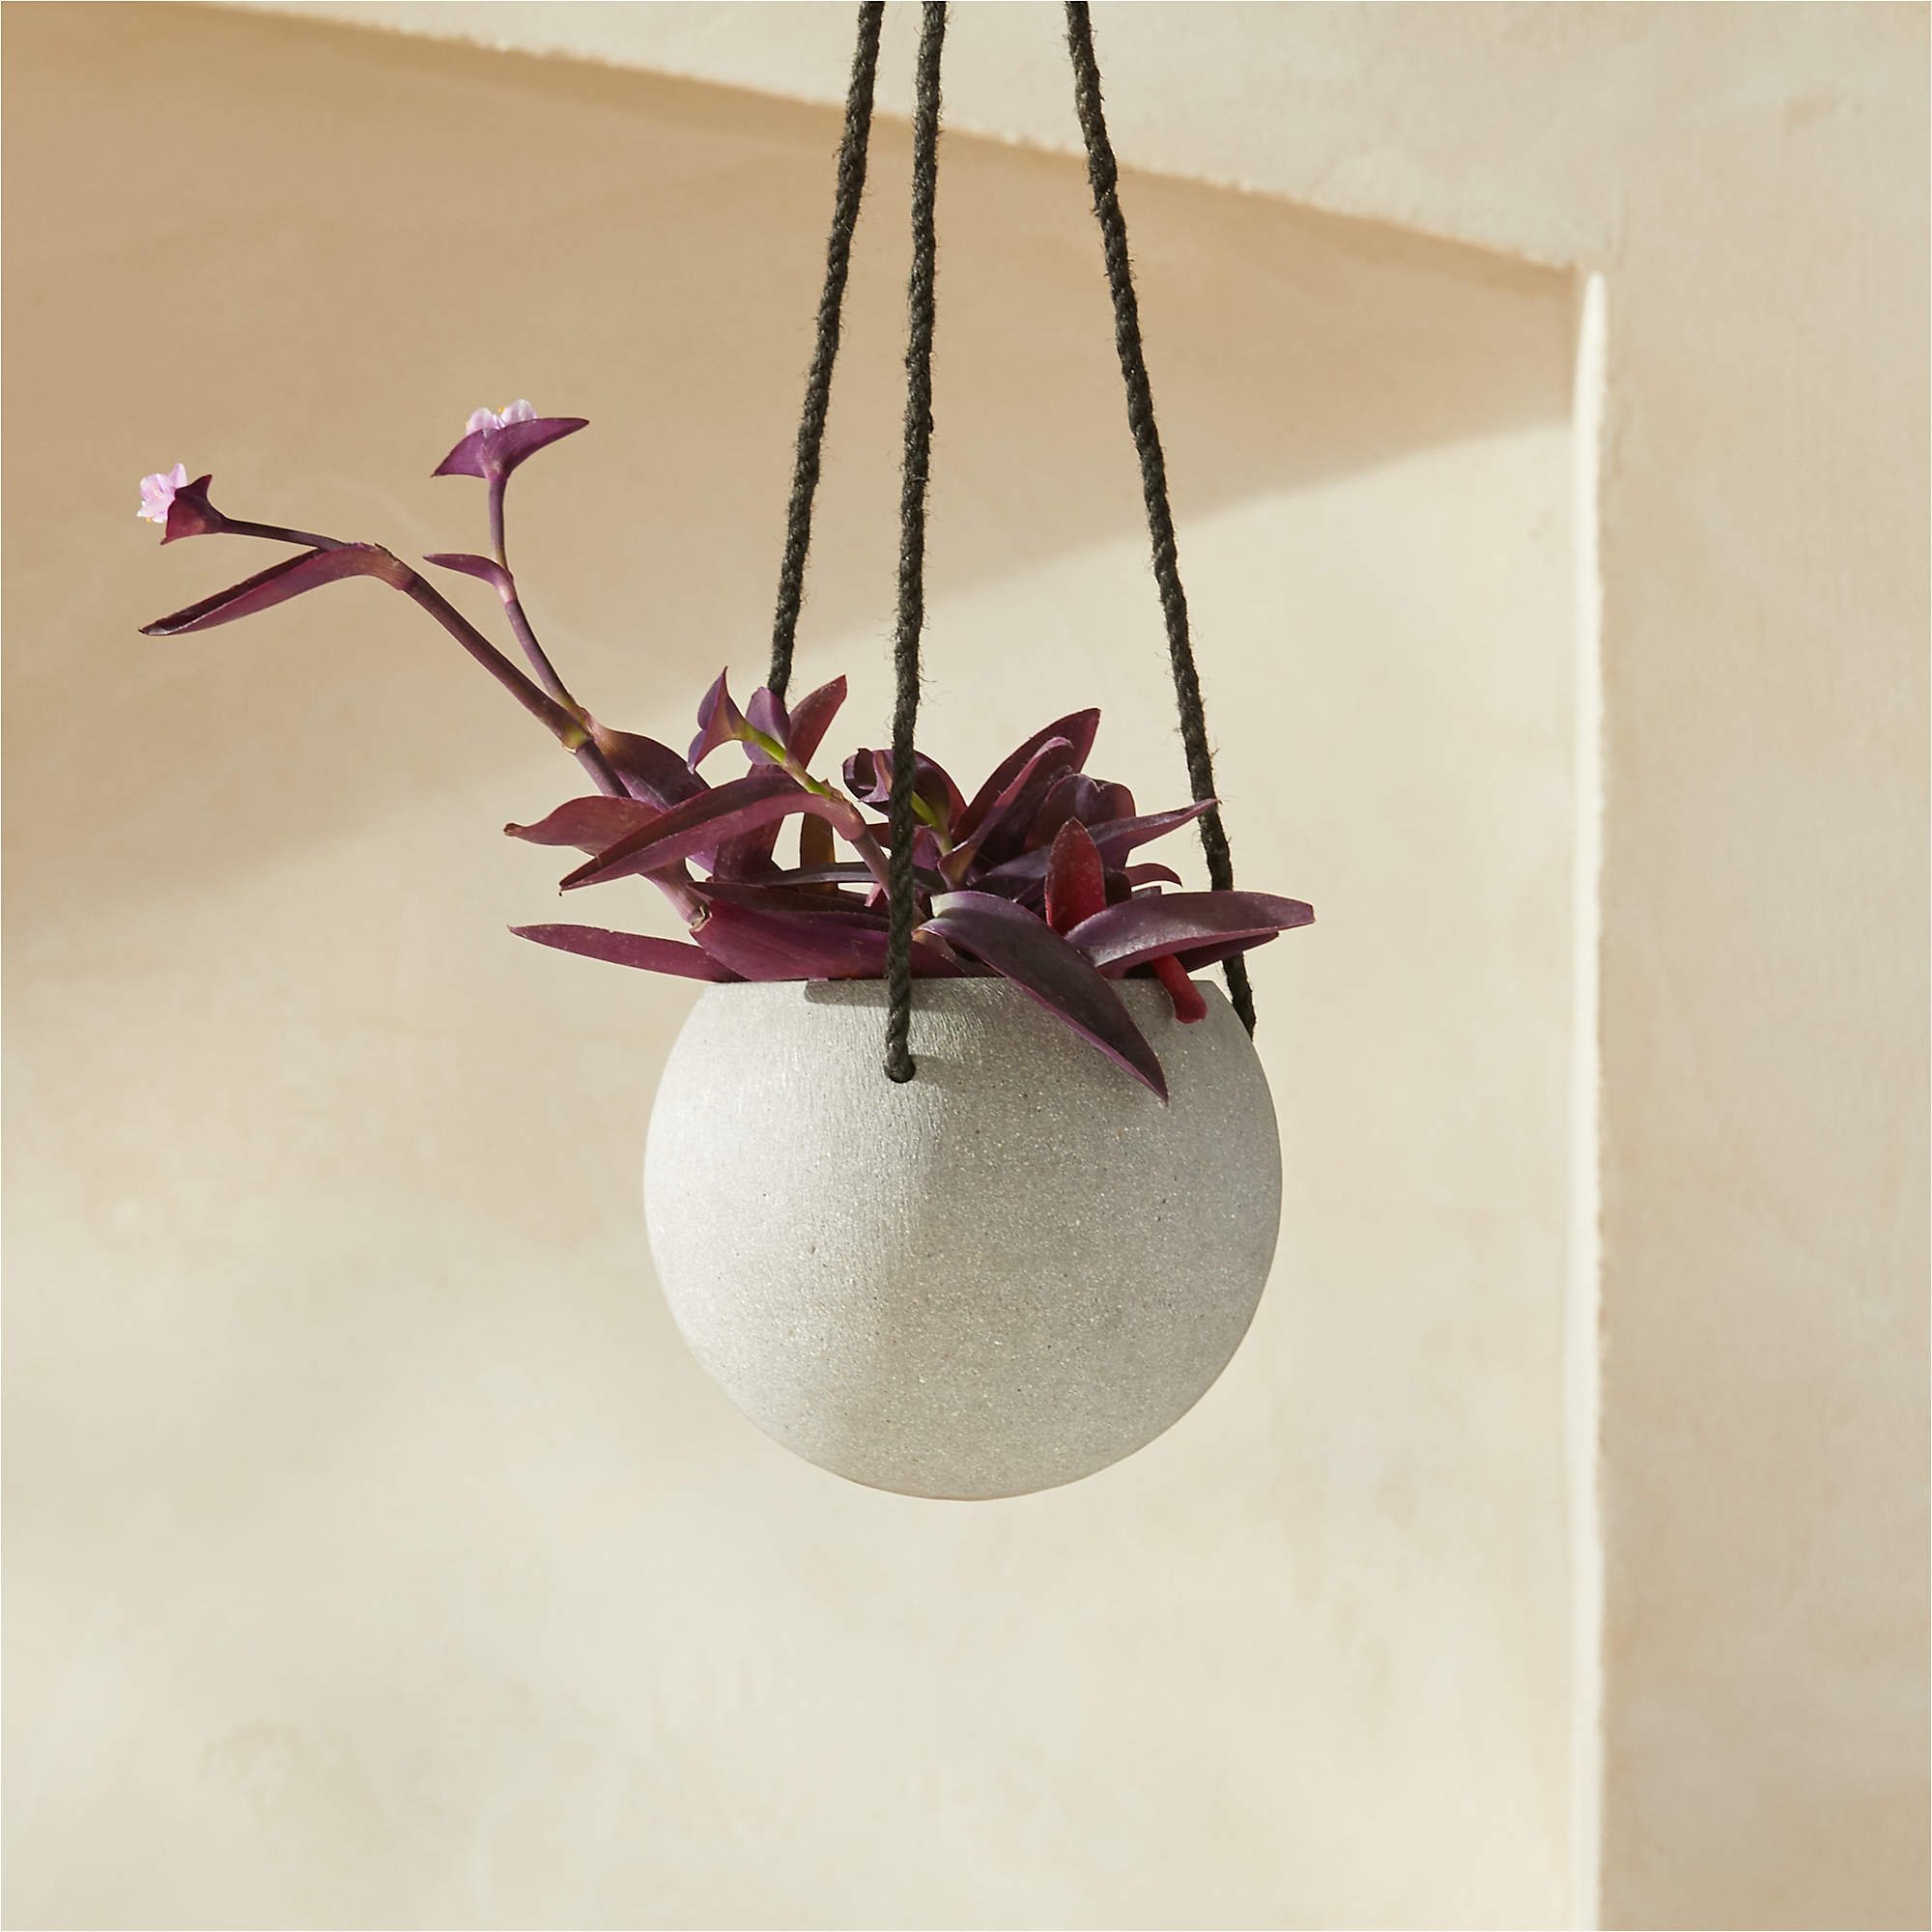 Orb Hanging Planter, White, Small - Image 1